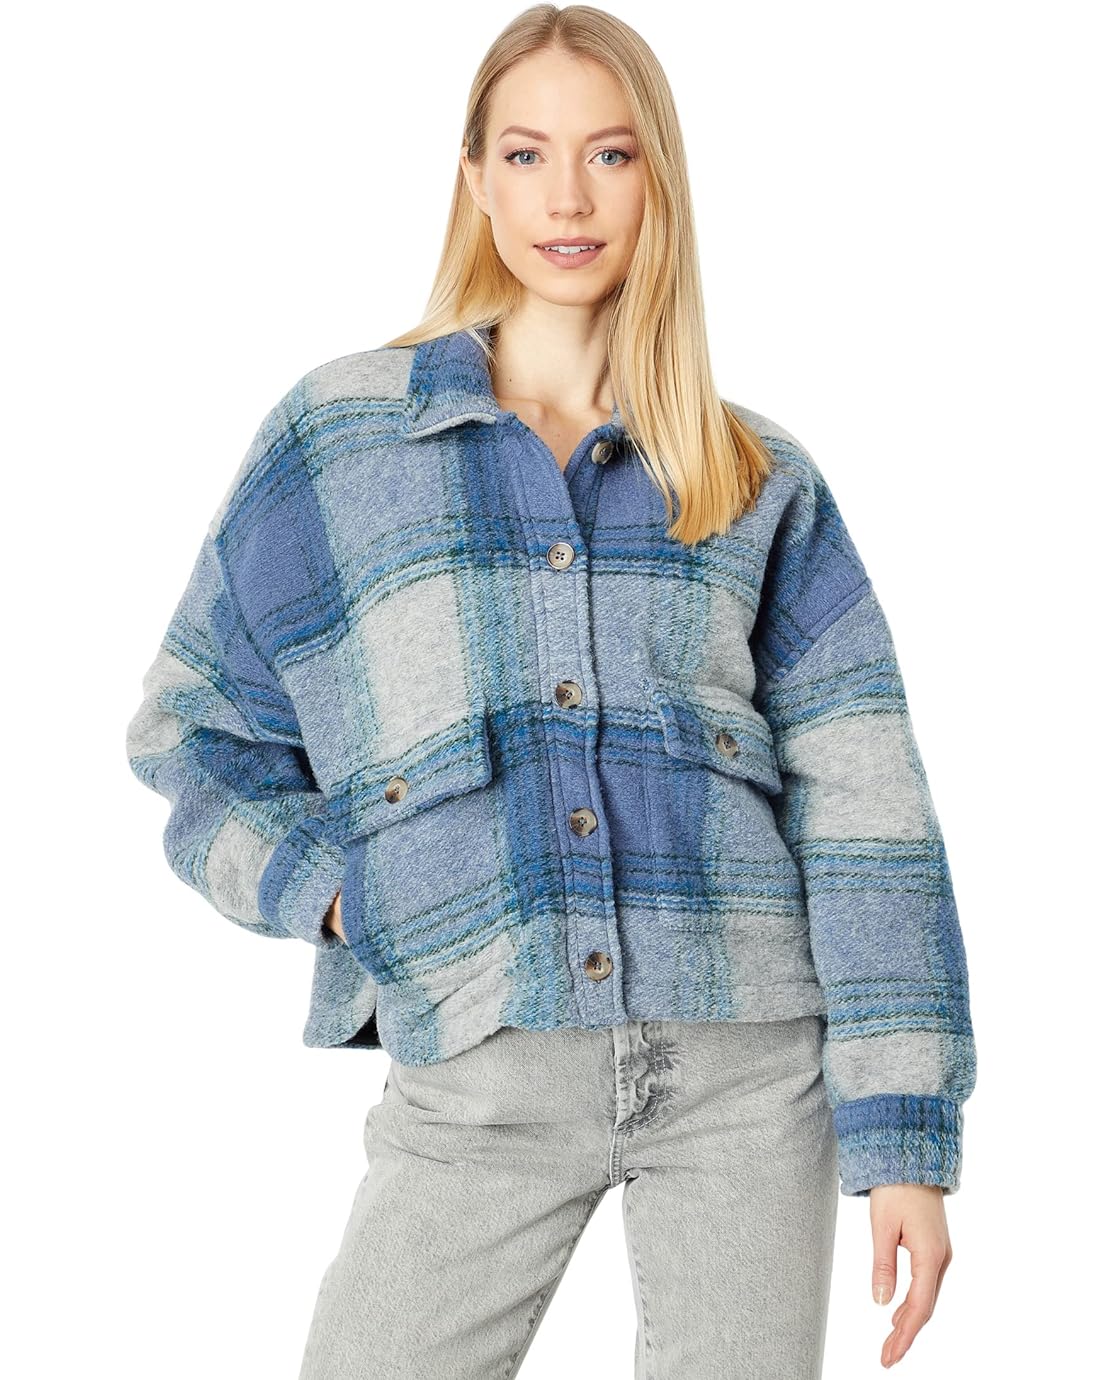 Saltwater Luxe Andi Long Sleeve Plaid Jacket